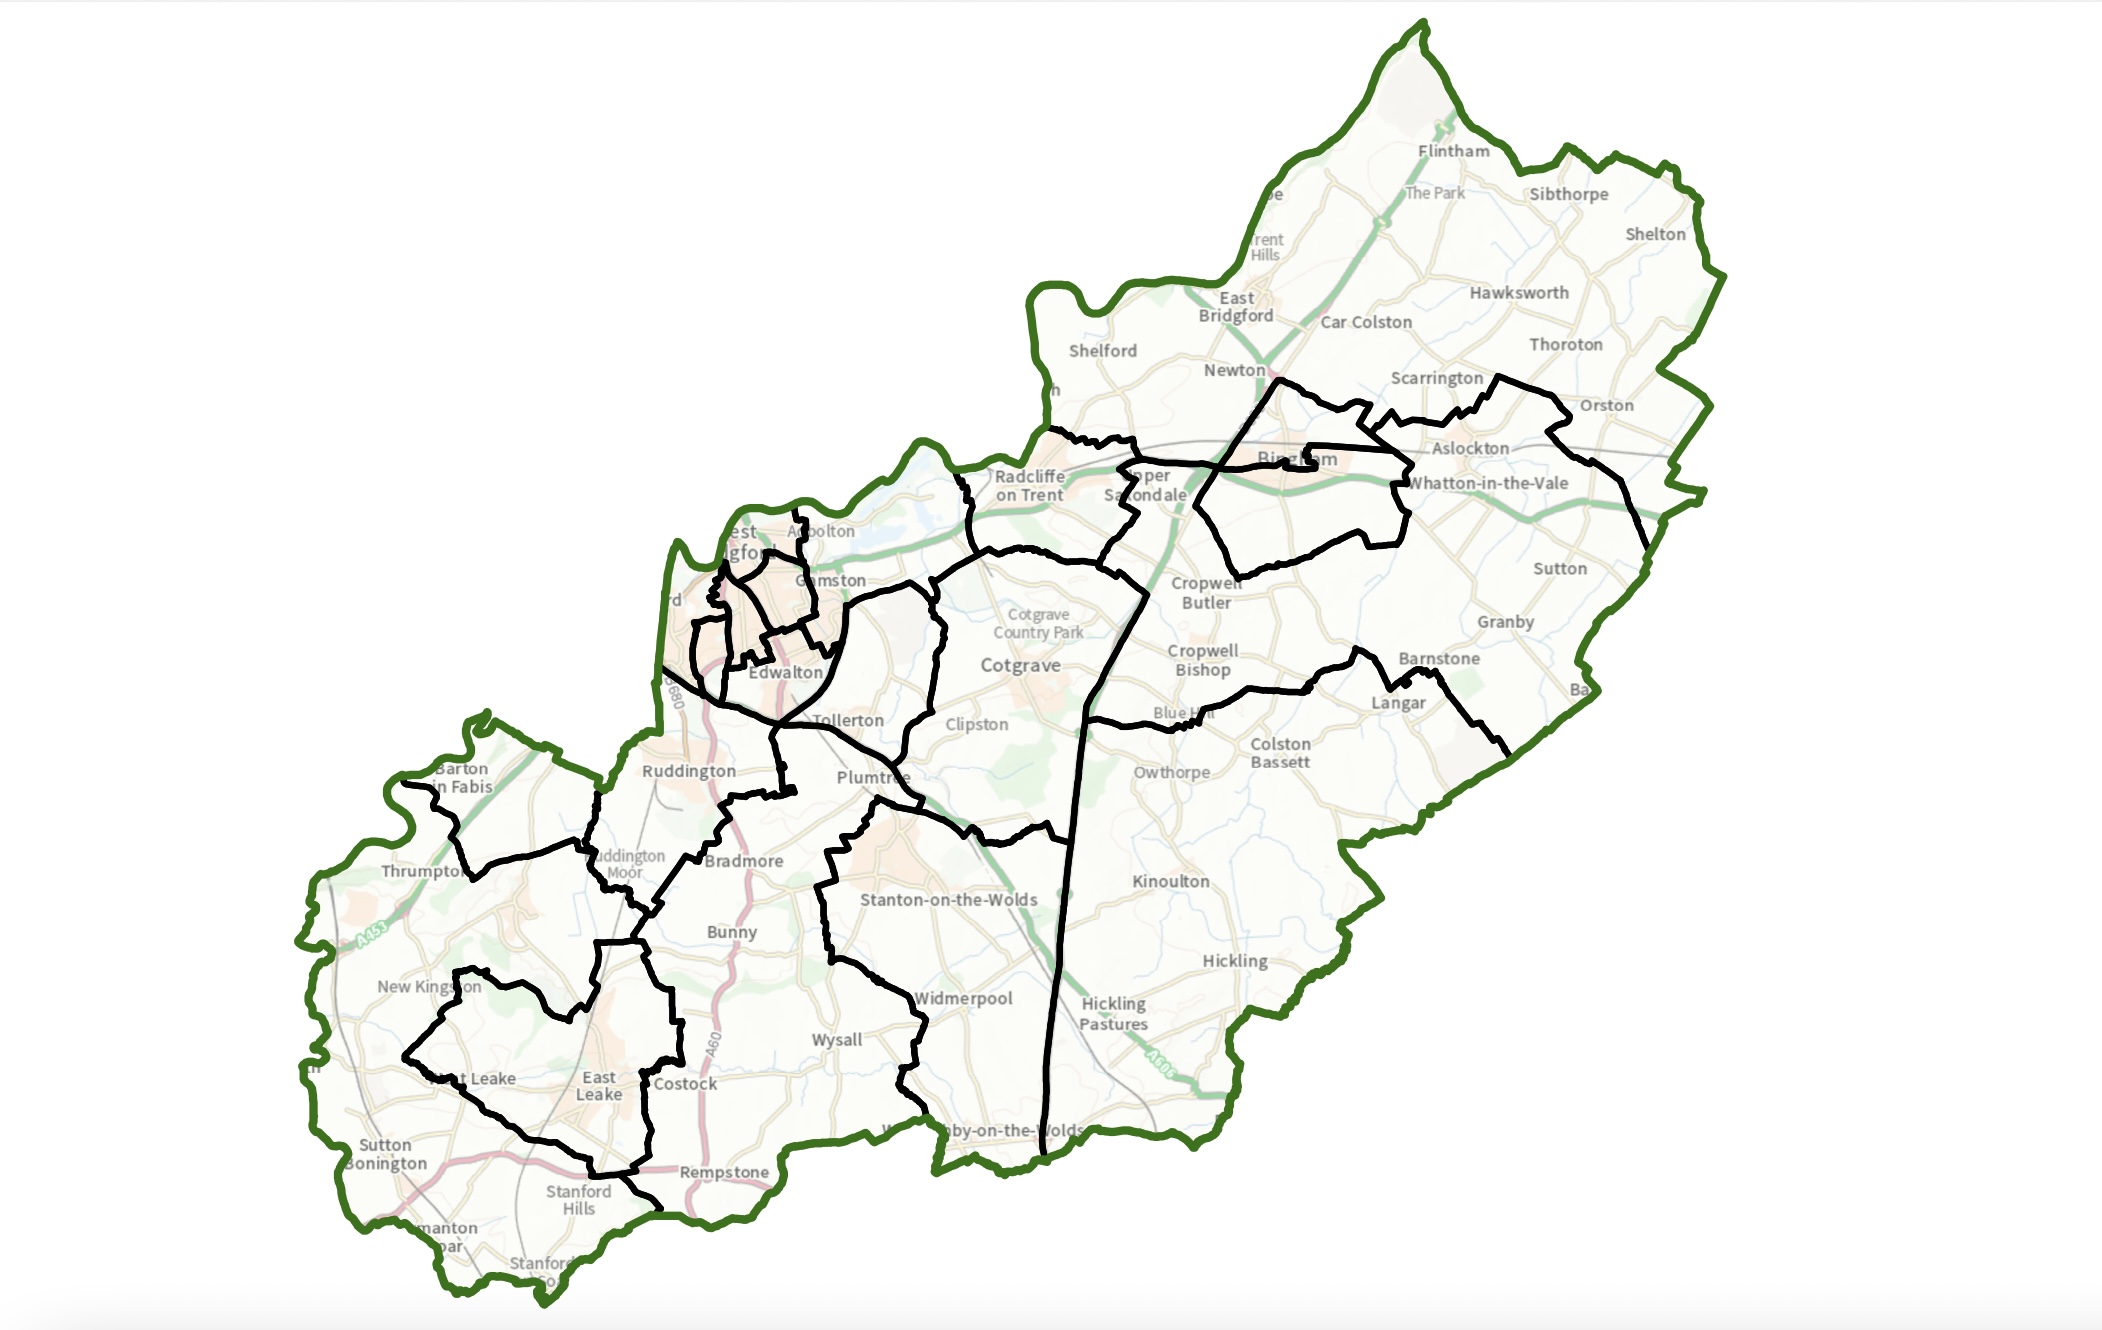 Proposed wards in Rushcliffe Borough Council Credit: contains Ordnance Survey data (c) Crown copyright and database rights 2020